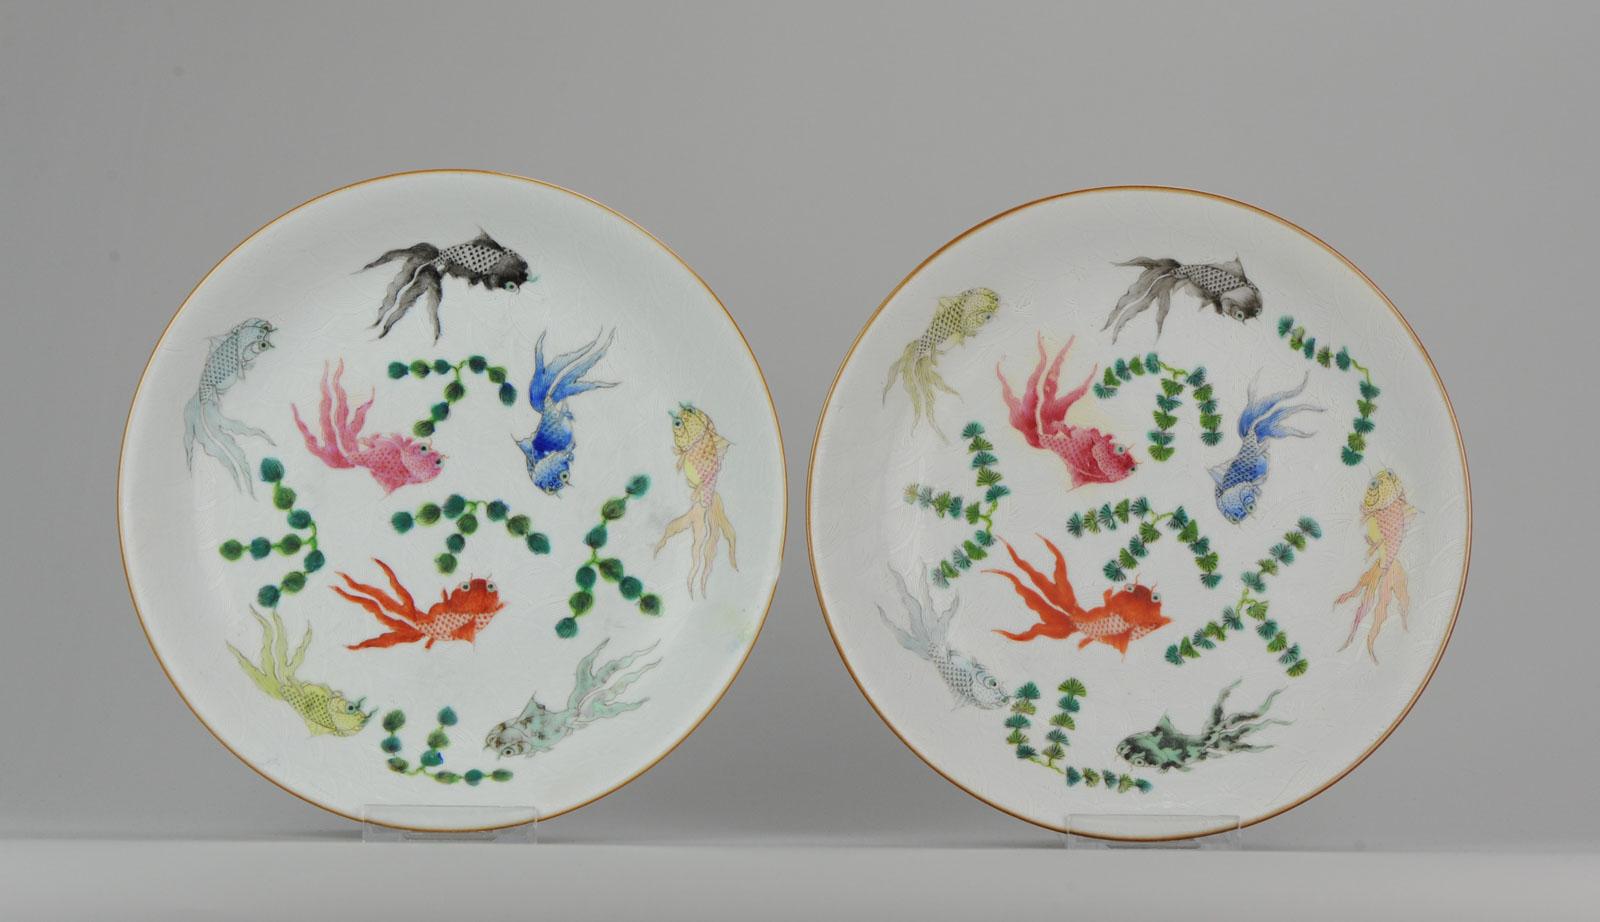 A fantastic pair of 2 19th-20th century period deep dishes with a scene of goldfishes. In our opinion around Daoguang period.
Beautiful painting quality and marked at the base with a Qianlong mark. Stunning condition.
Condition:
Overall